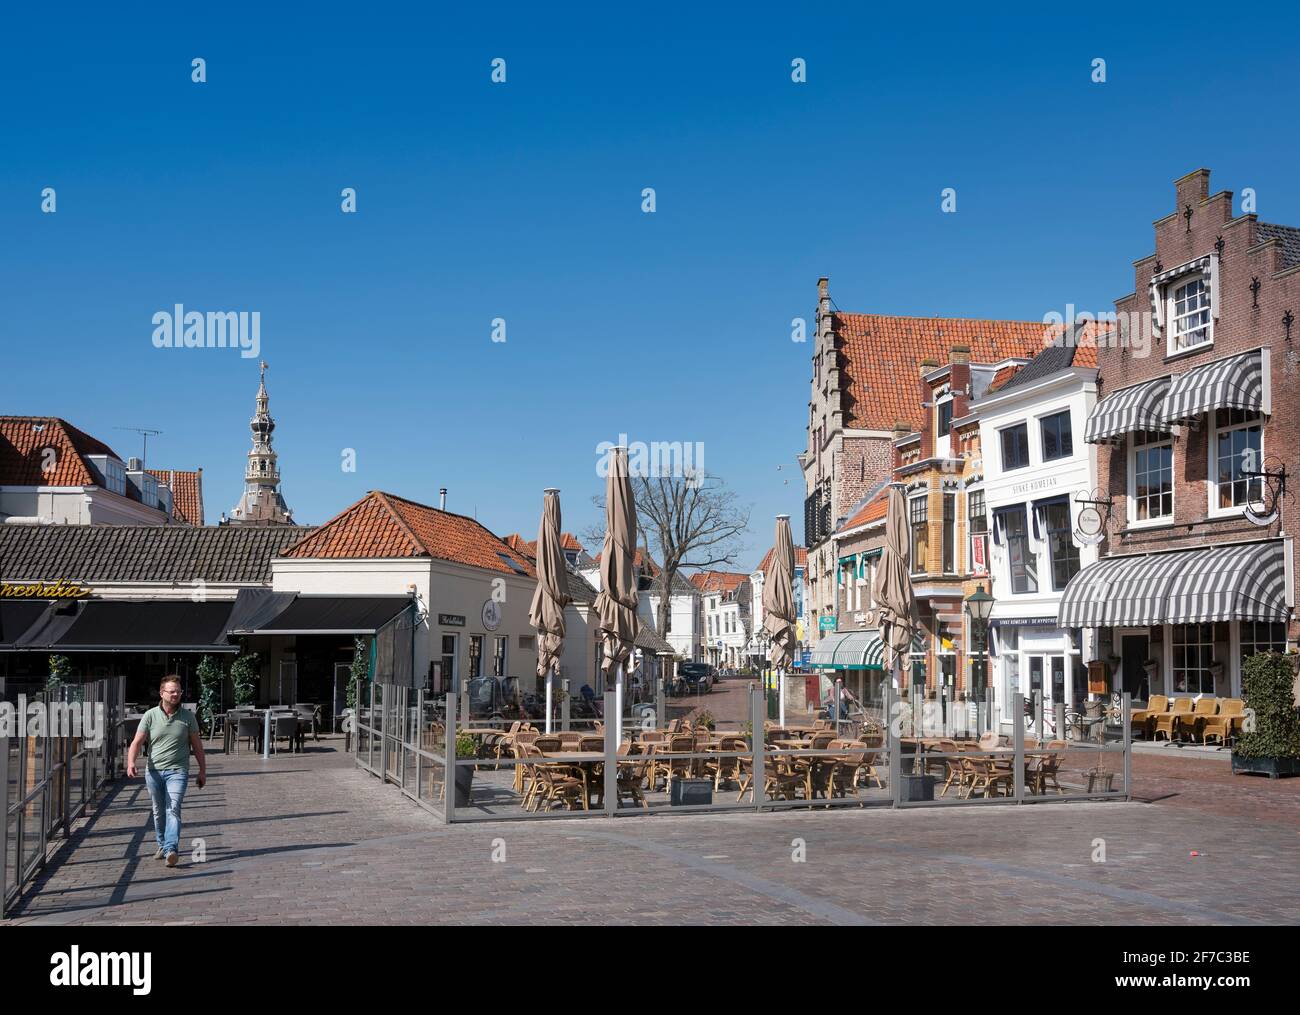 man on old square in dutch town of zierikzee in spring Stock Photo